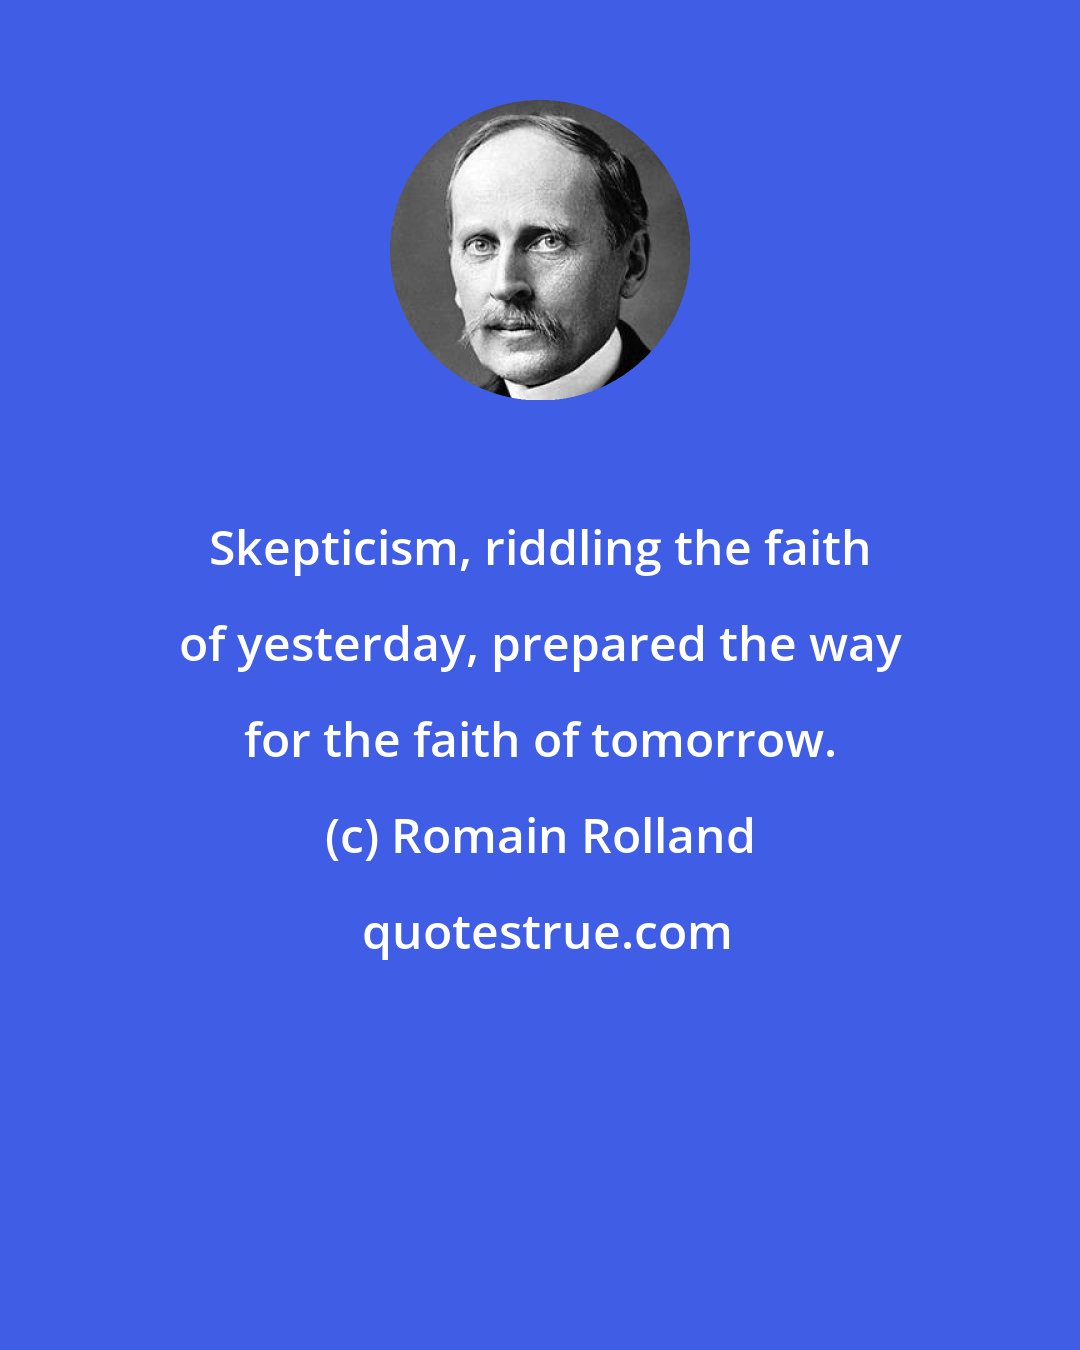 Romain Rolland: Skepticism, riddling the faith of yesterday, prepared the way for the faith of tomorrow.